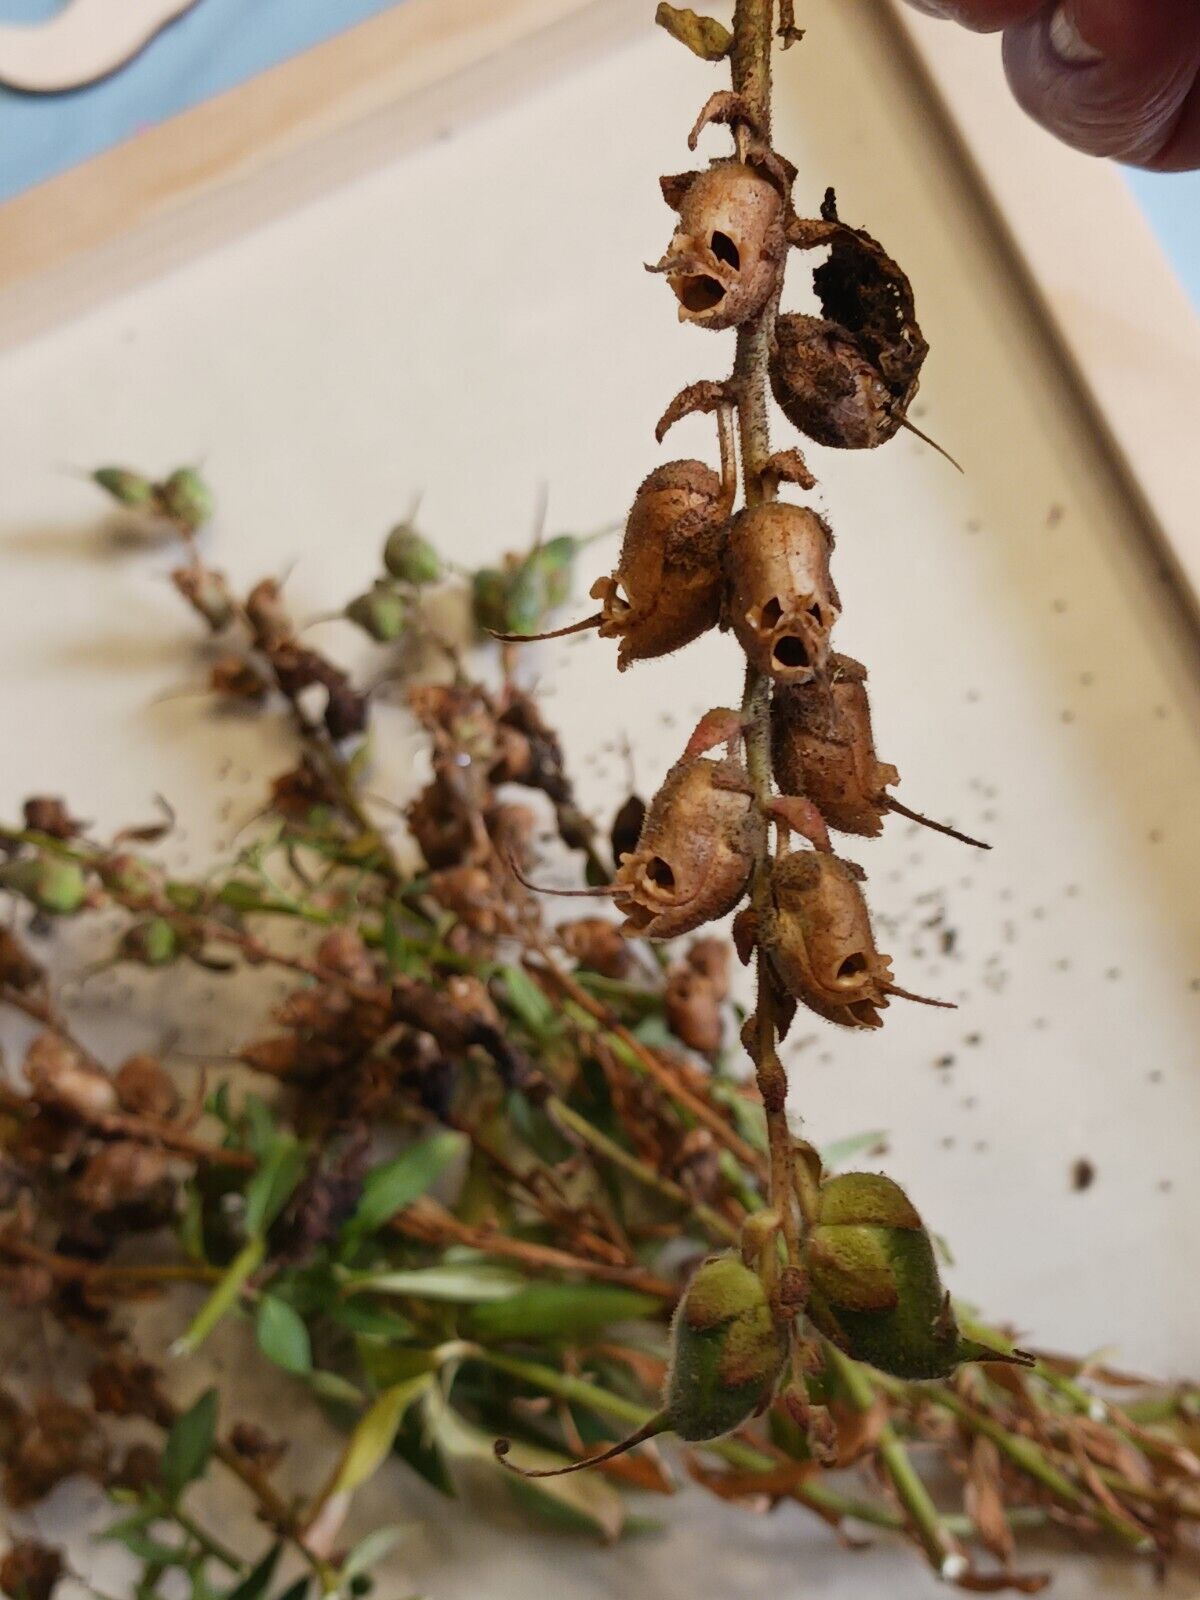 Dried Snapdragon Seed Pods Skulls Gothic Apothecary Curiosity  Botanical Hauntin